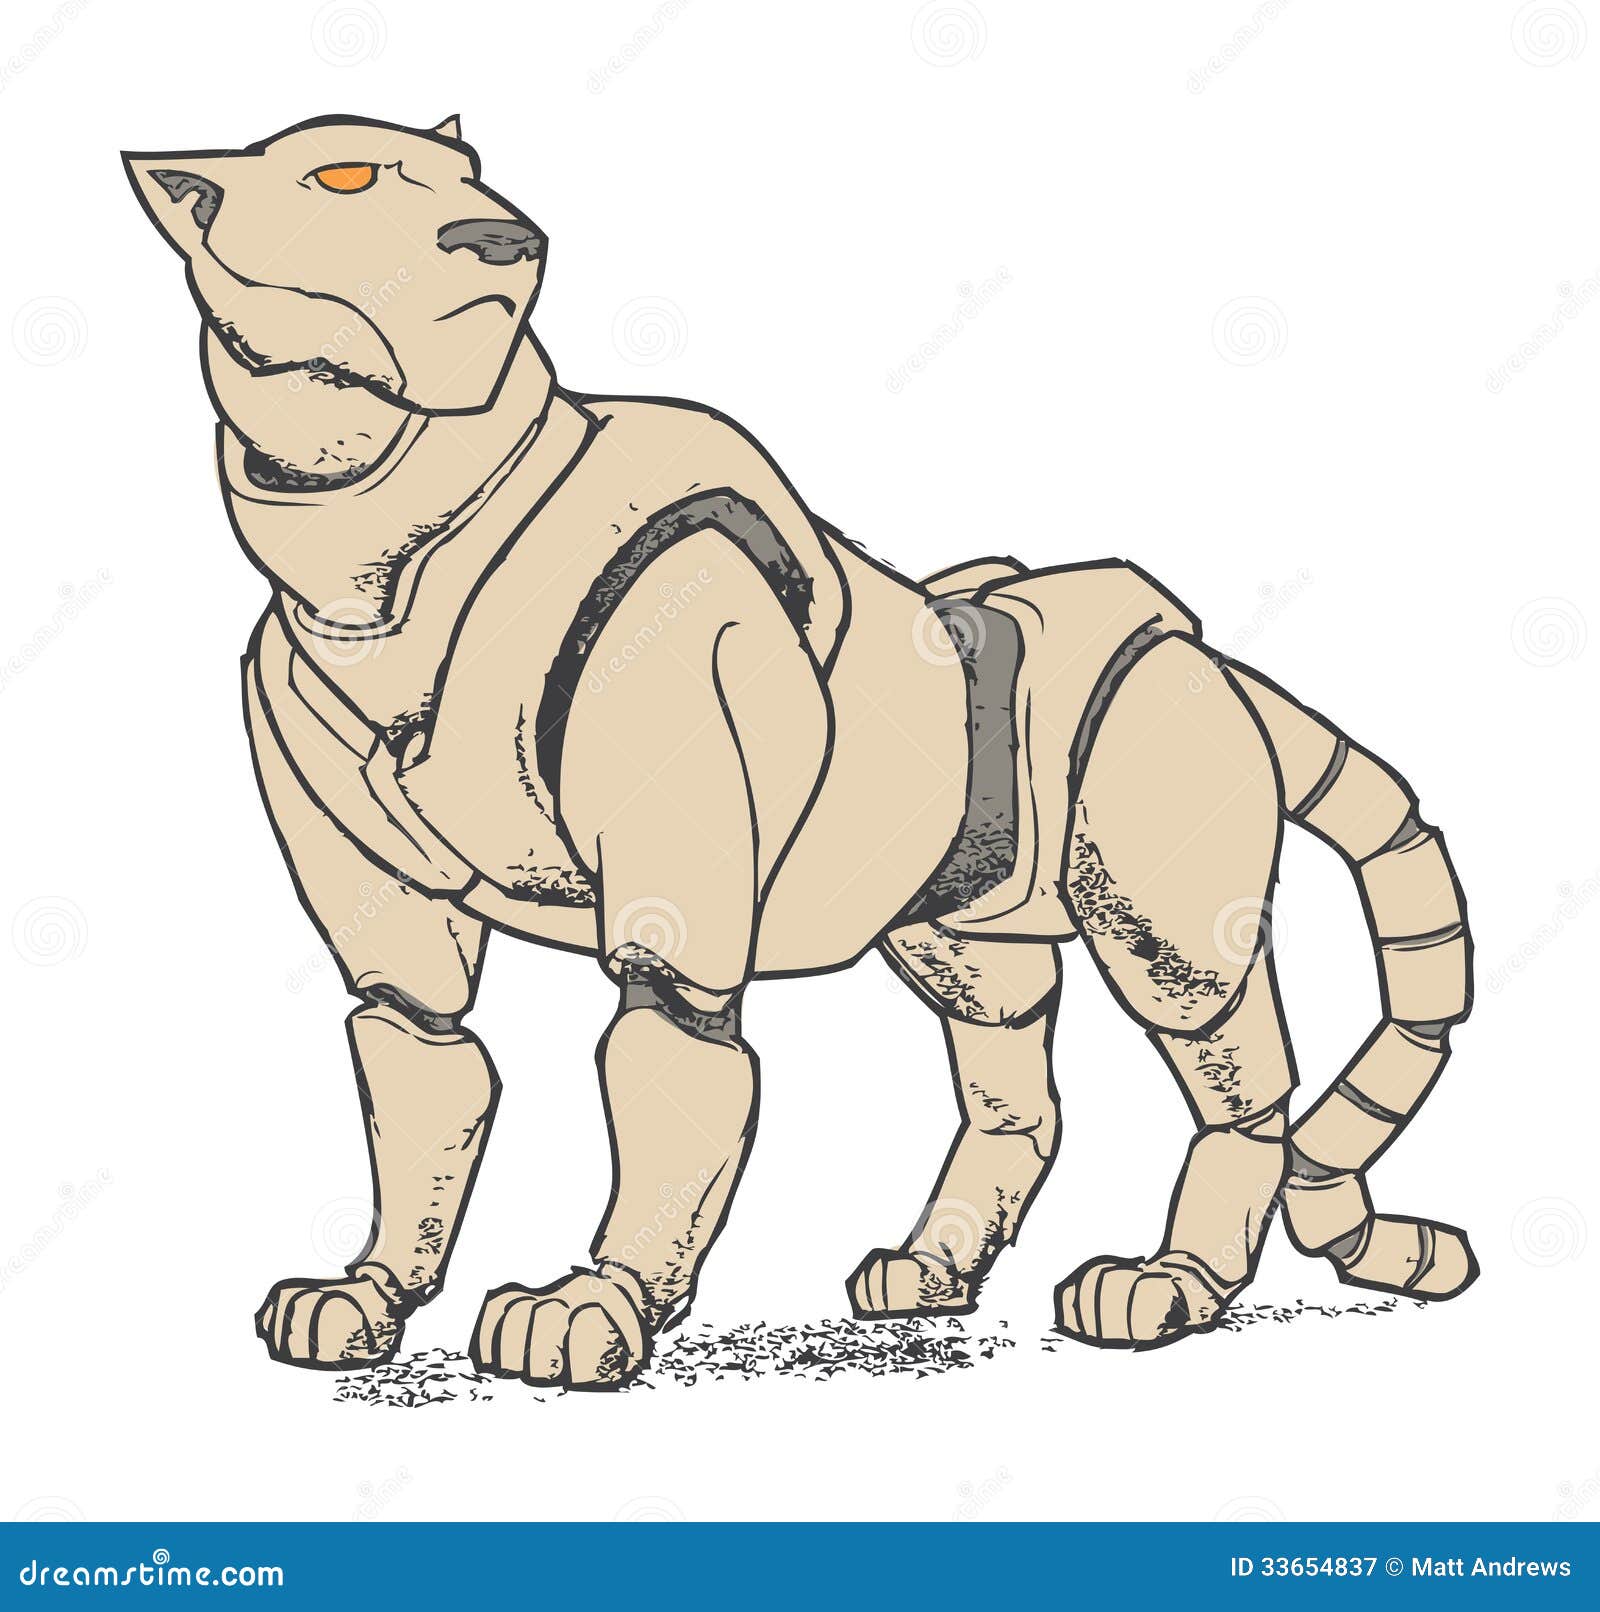 Lioness Robot Royalty Free Stock Photography  Image: 33654837